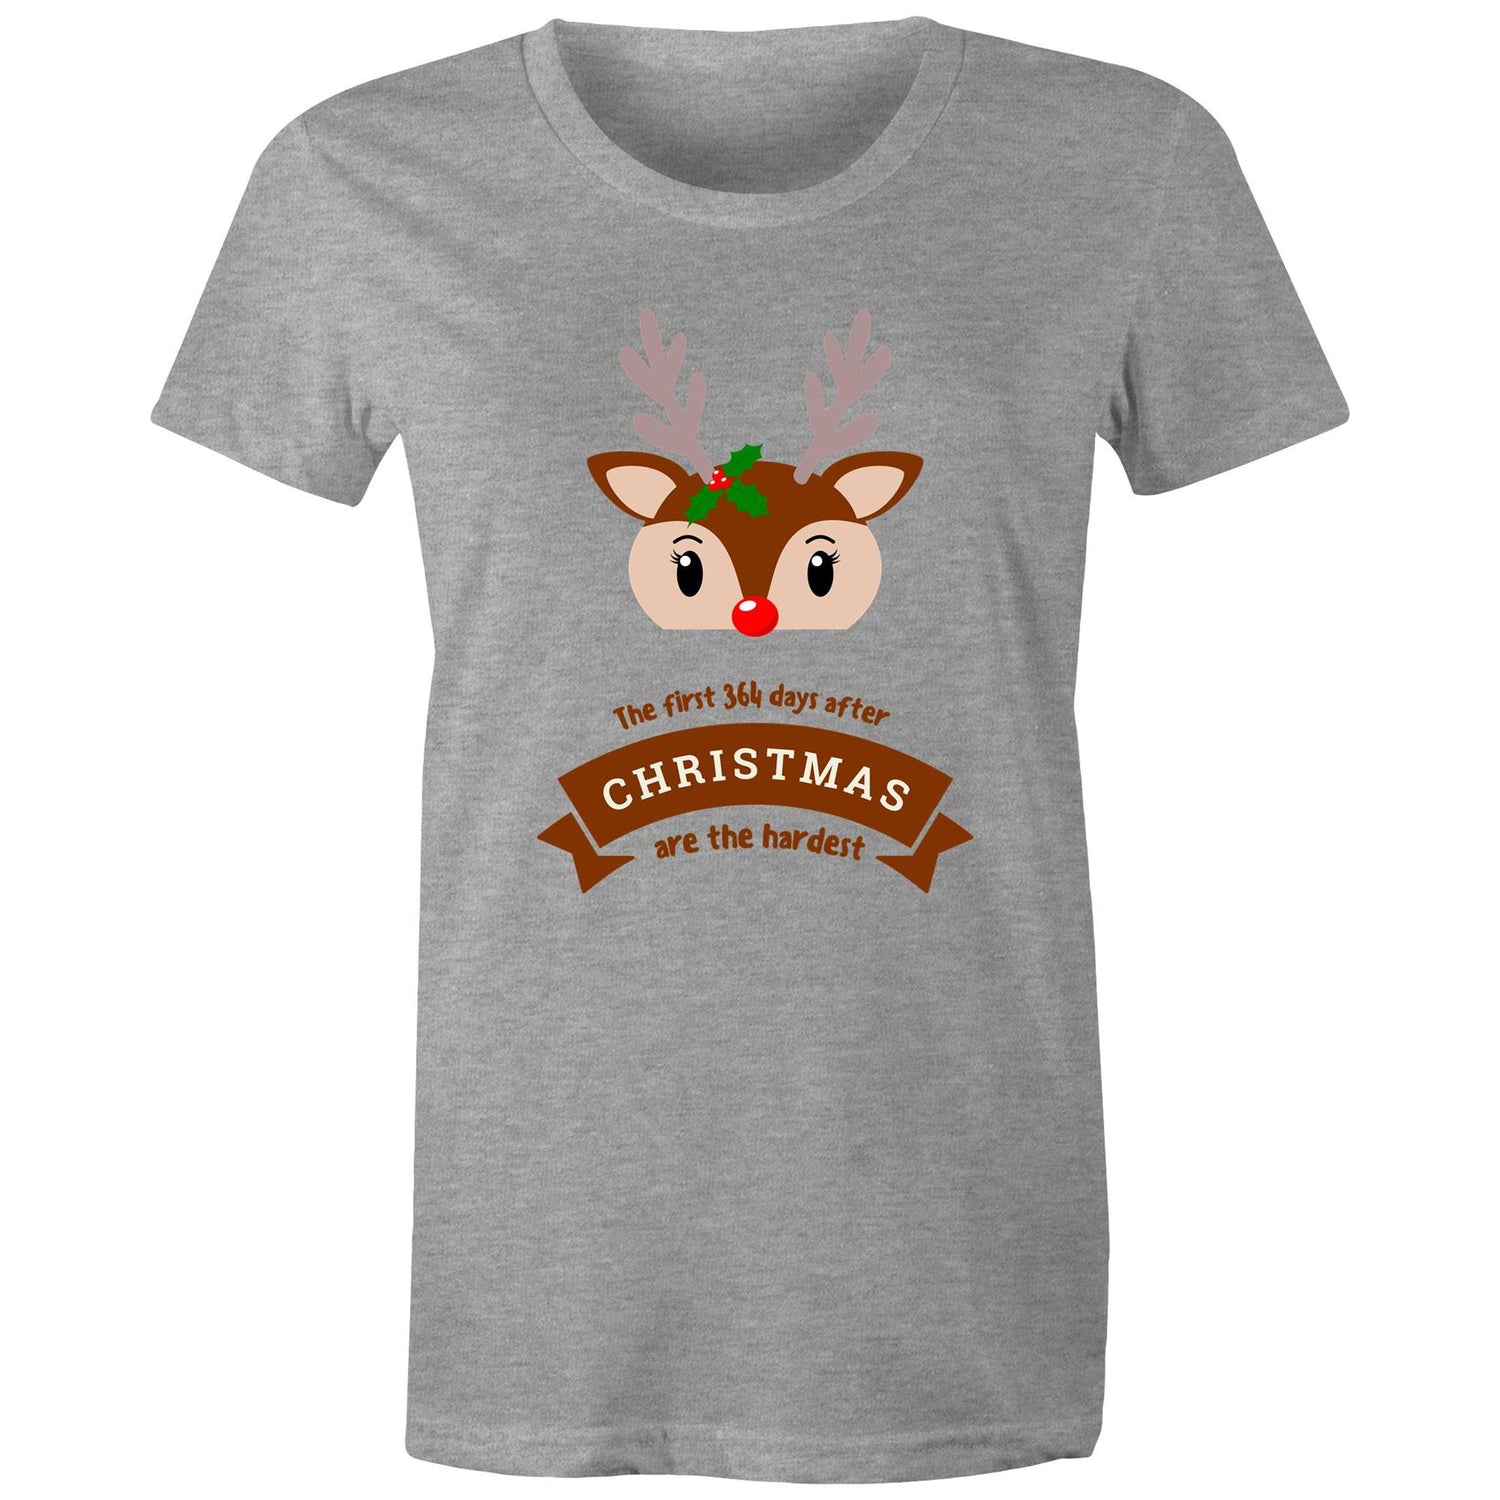 Christmas - The First 364 Days After Xmas Are The Hardest - Women's T-shirt